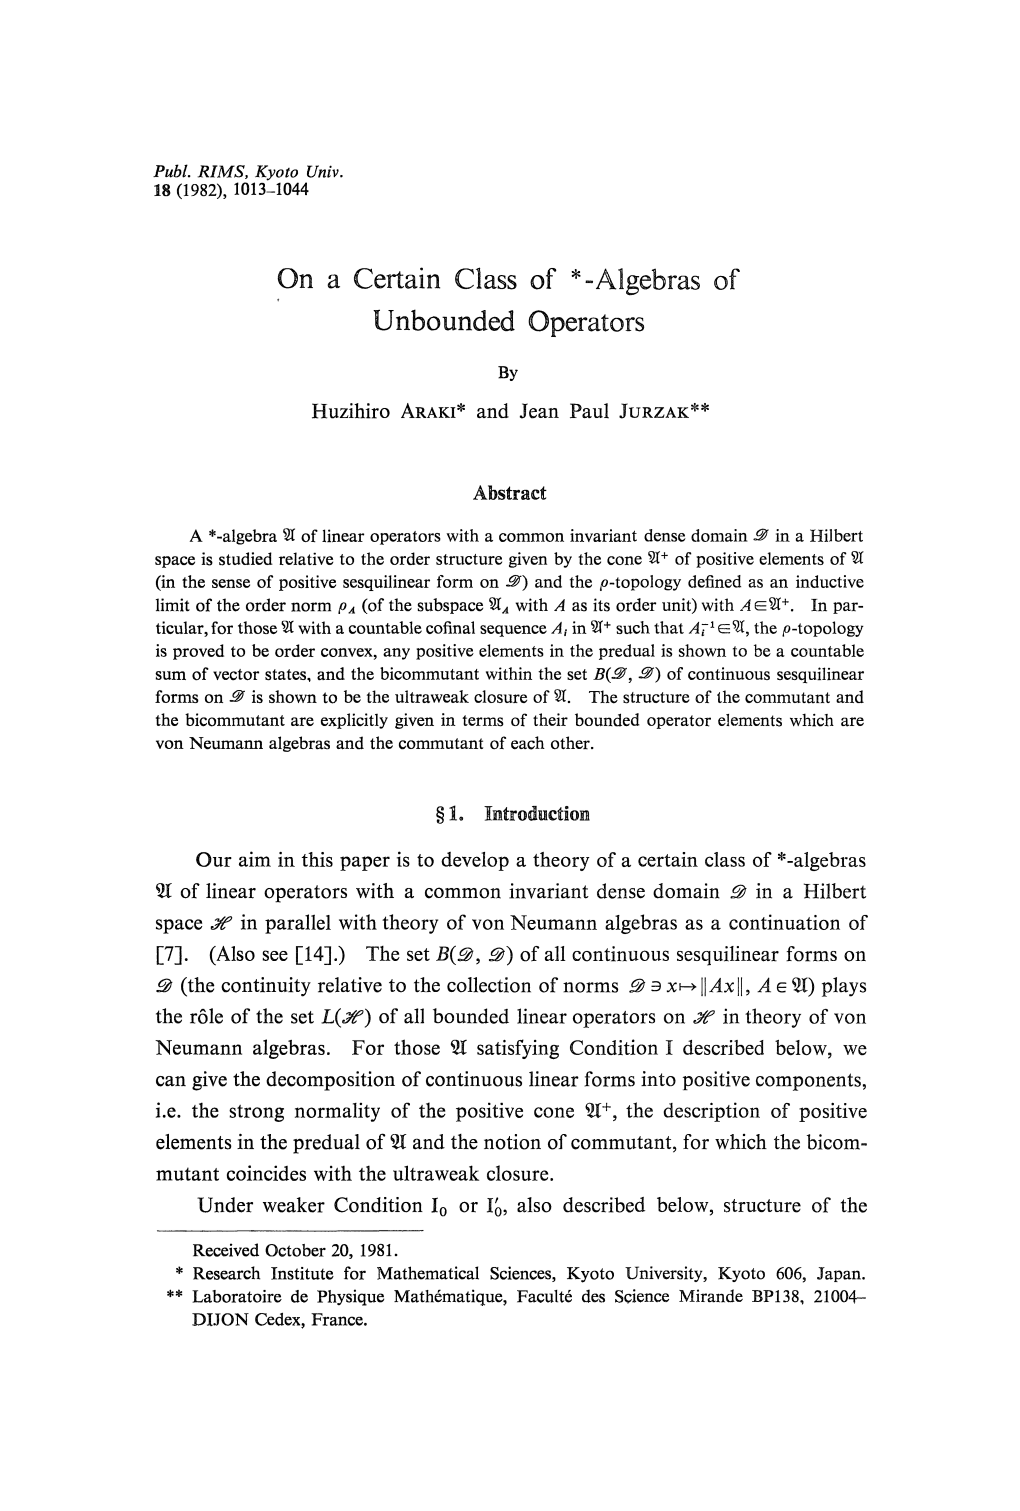 On a Certain Class of *-Algebras of Unbounded Operators